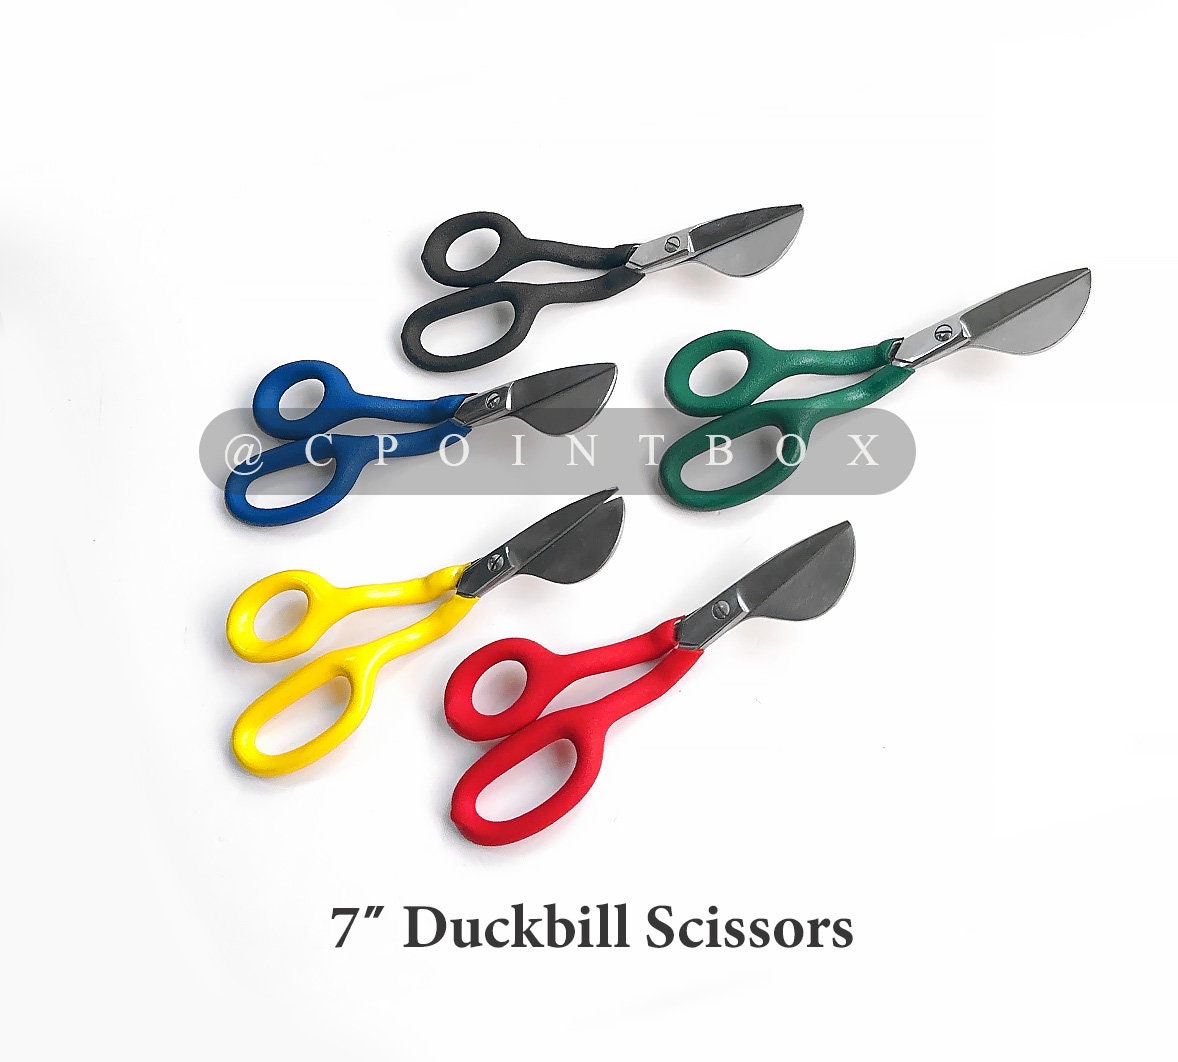 Best Professional Fabric Scissors, Shears; Sewing Quilting Embroidery  Dressmaking; Fiskars 8 Inch Forged Scissors